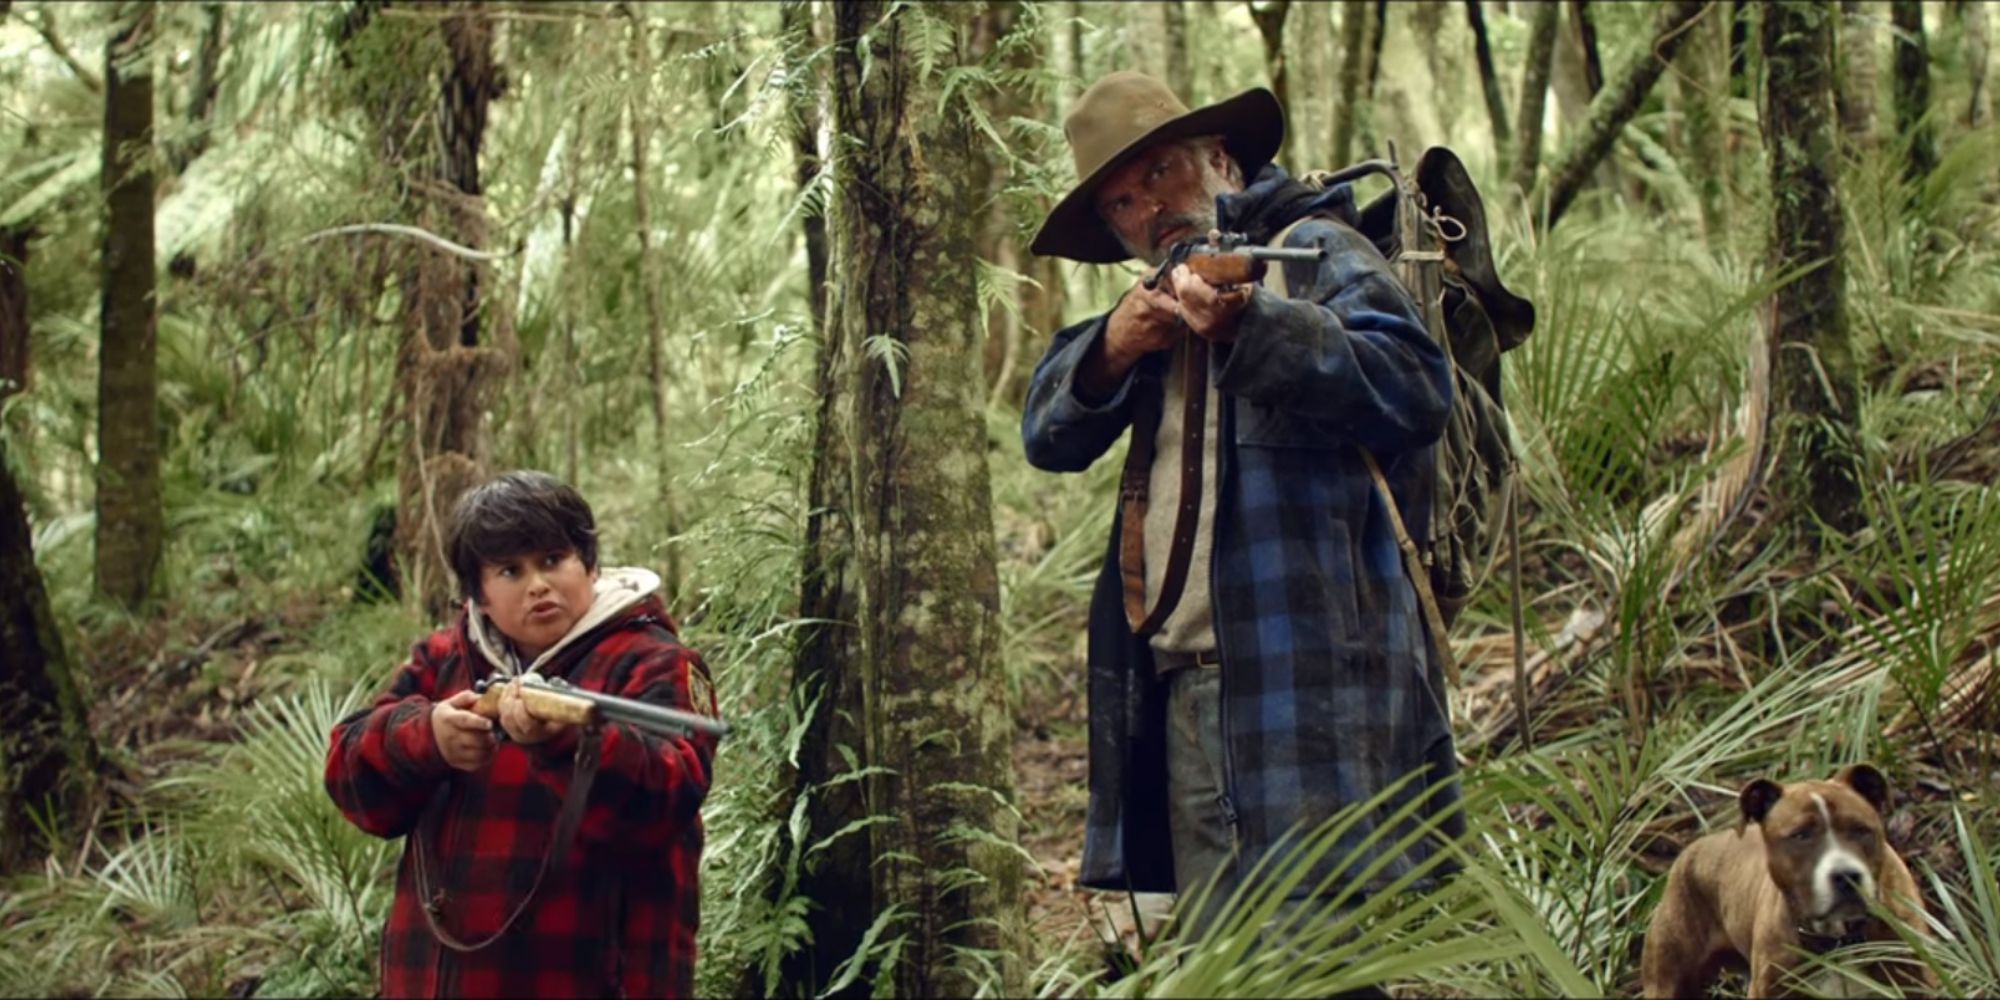 Hector and Ricky aiming their rifles in the same direction in Hunt for the Wilderpeople.